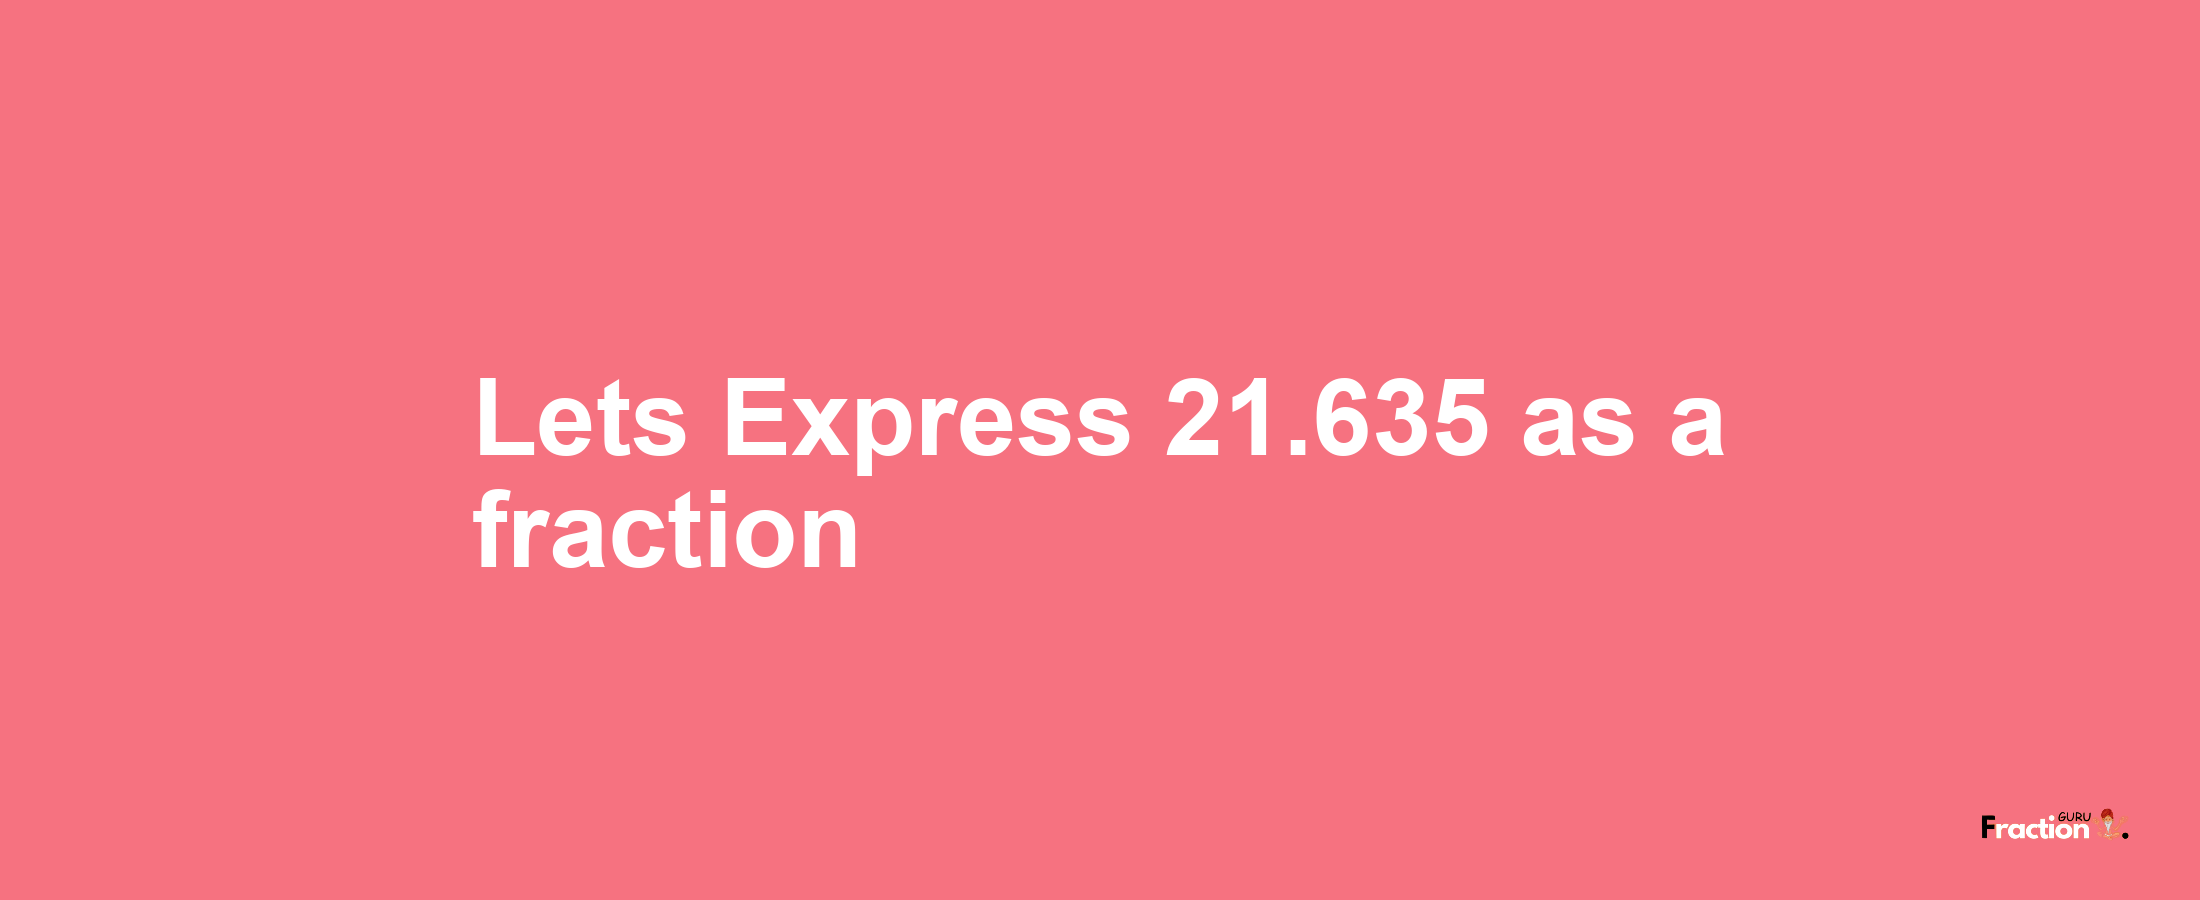 Lets Express 21.635 as afraction